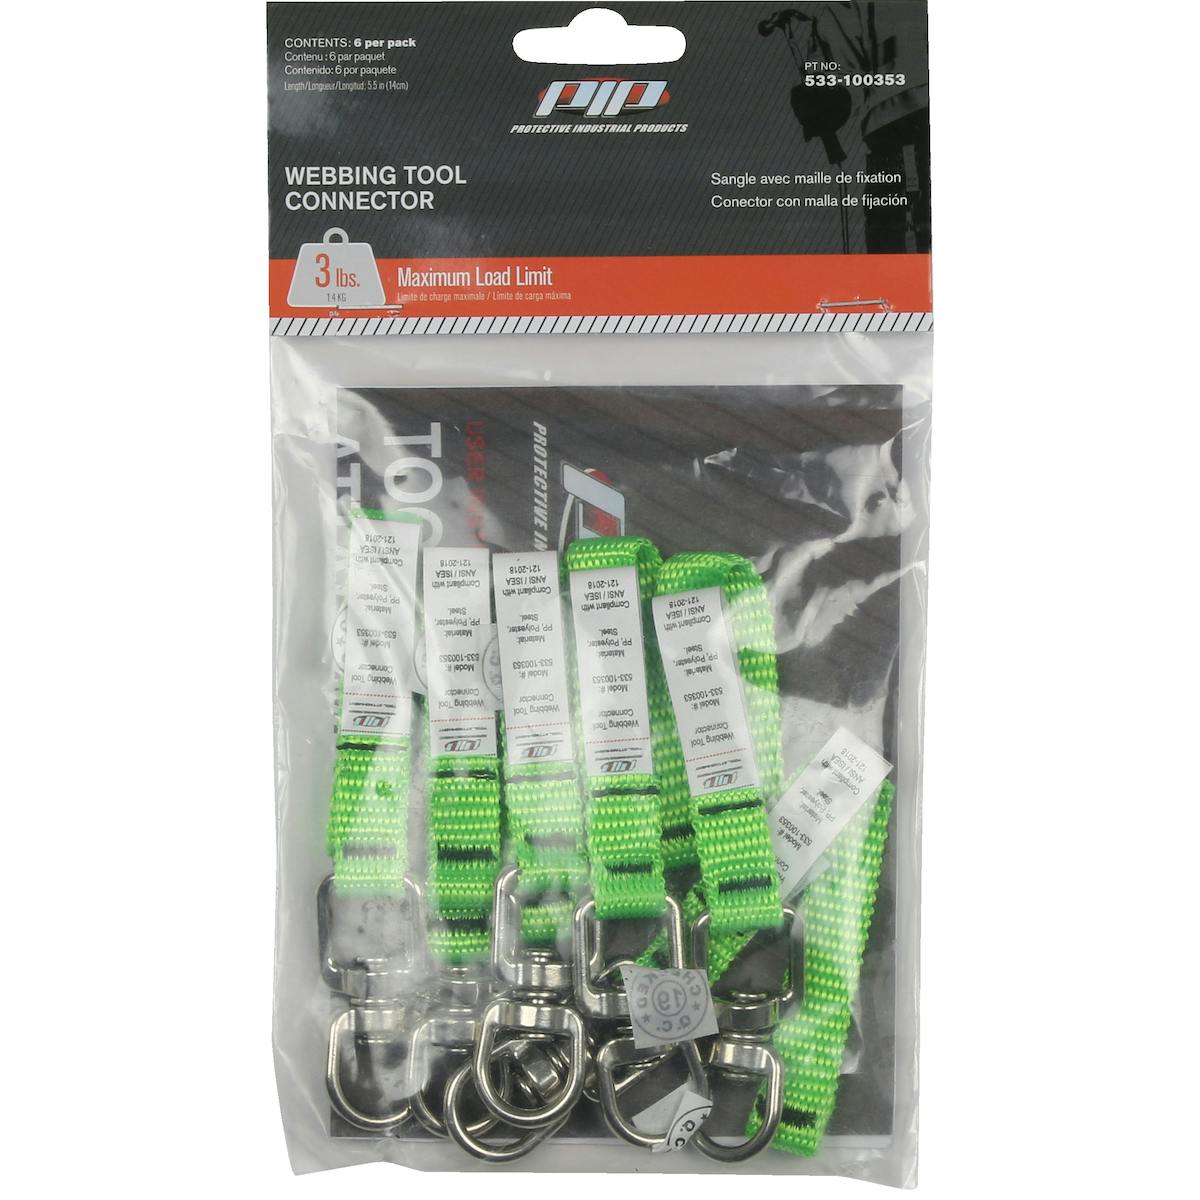 Webbing Tool Connector 5.5" - 3 lbs. maximum load limit - Retail Packaged, Green (533-100353) - OS